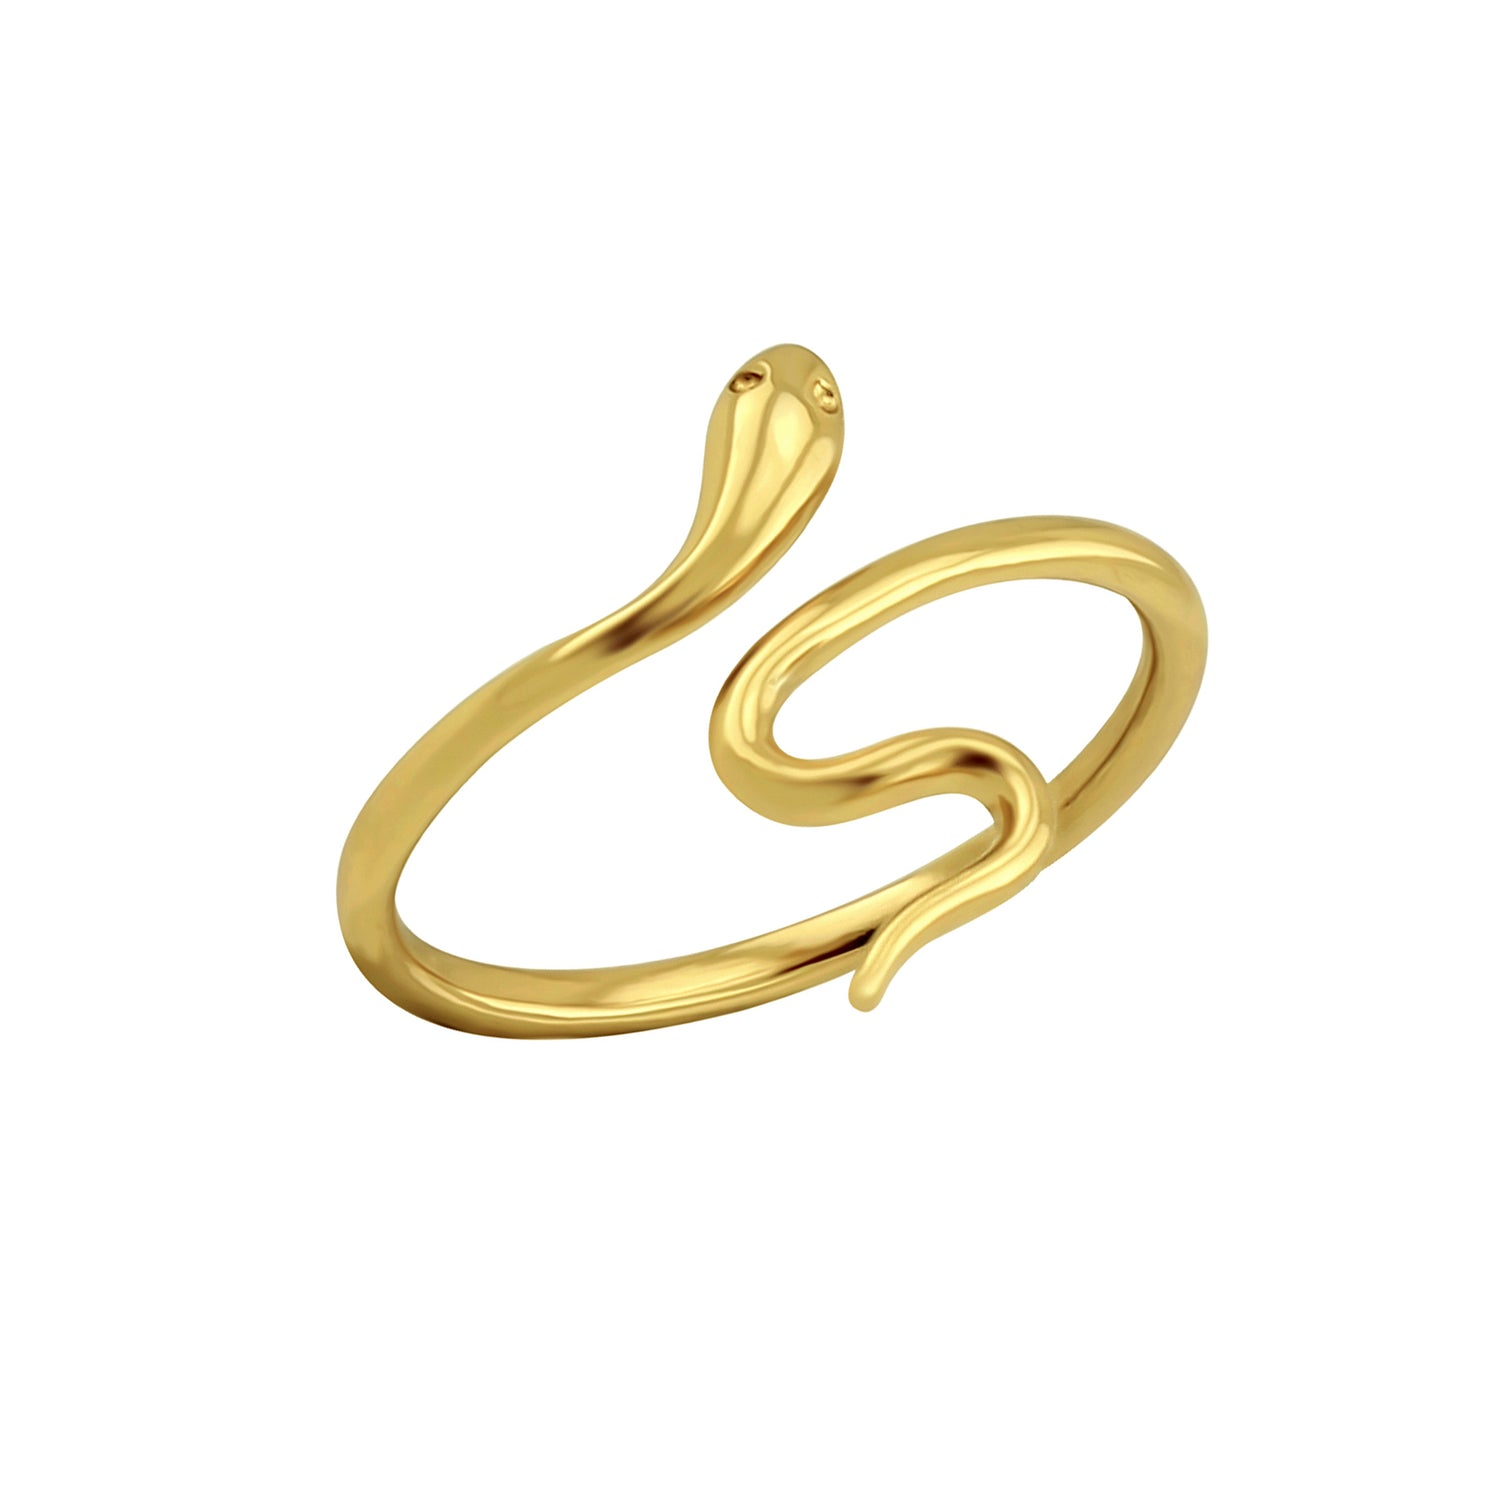 Slithering Snake Bracelet | Silver Gold Chain | Light Years Jewelry Gold Plated